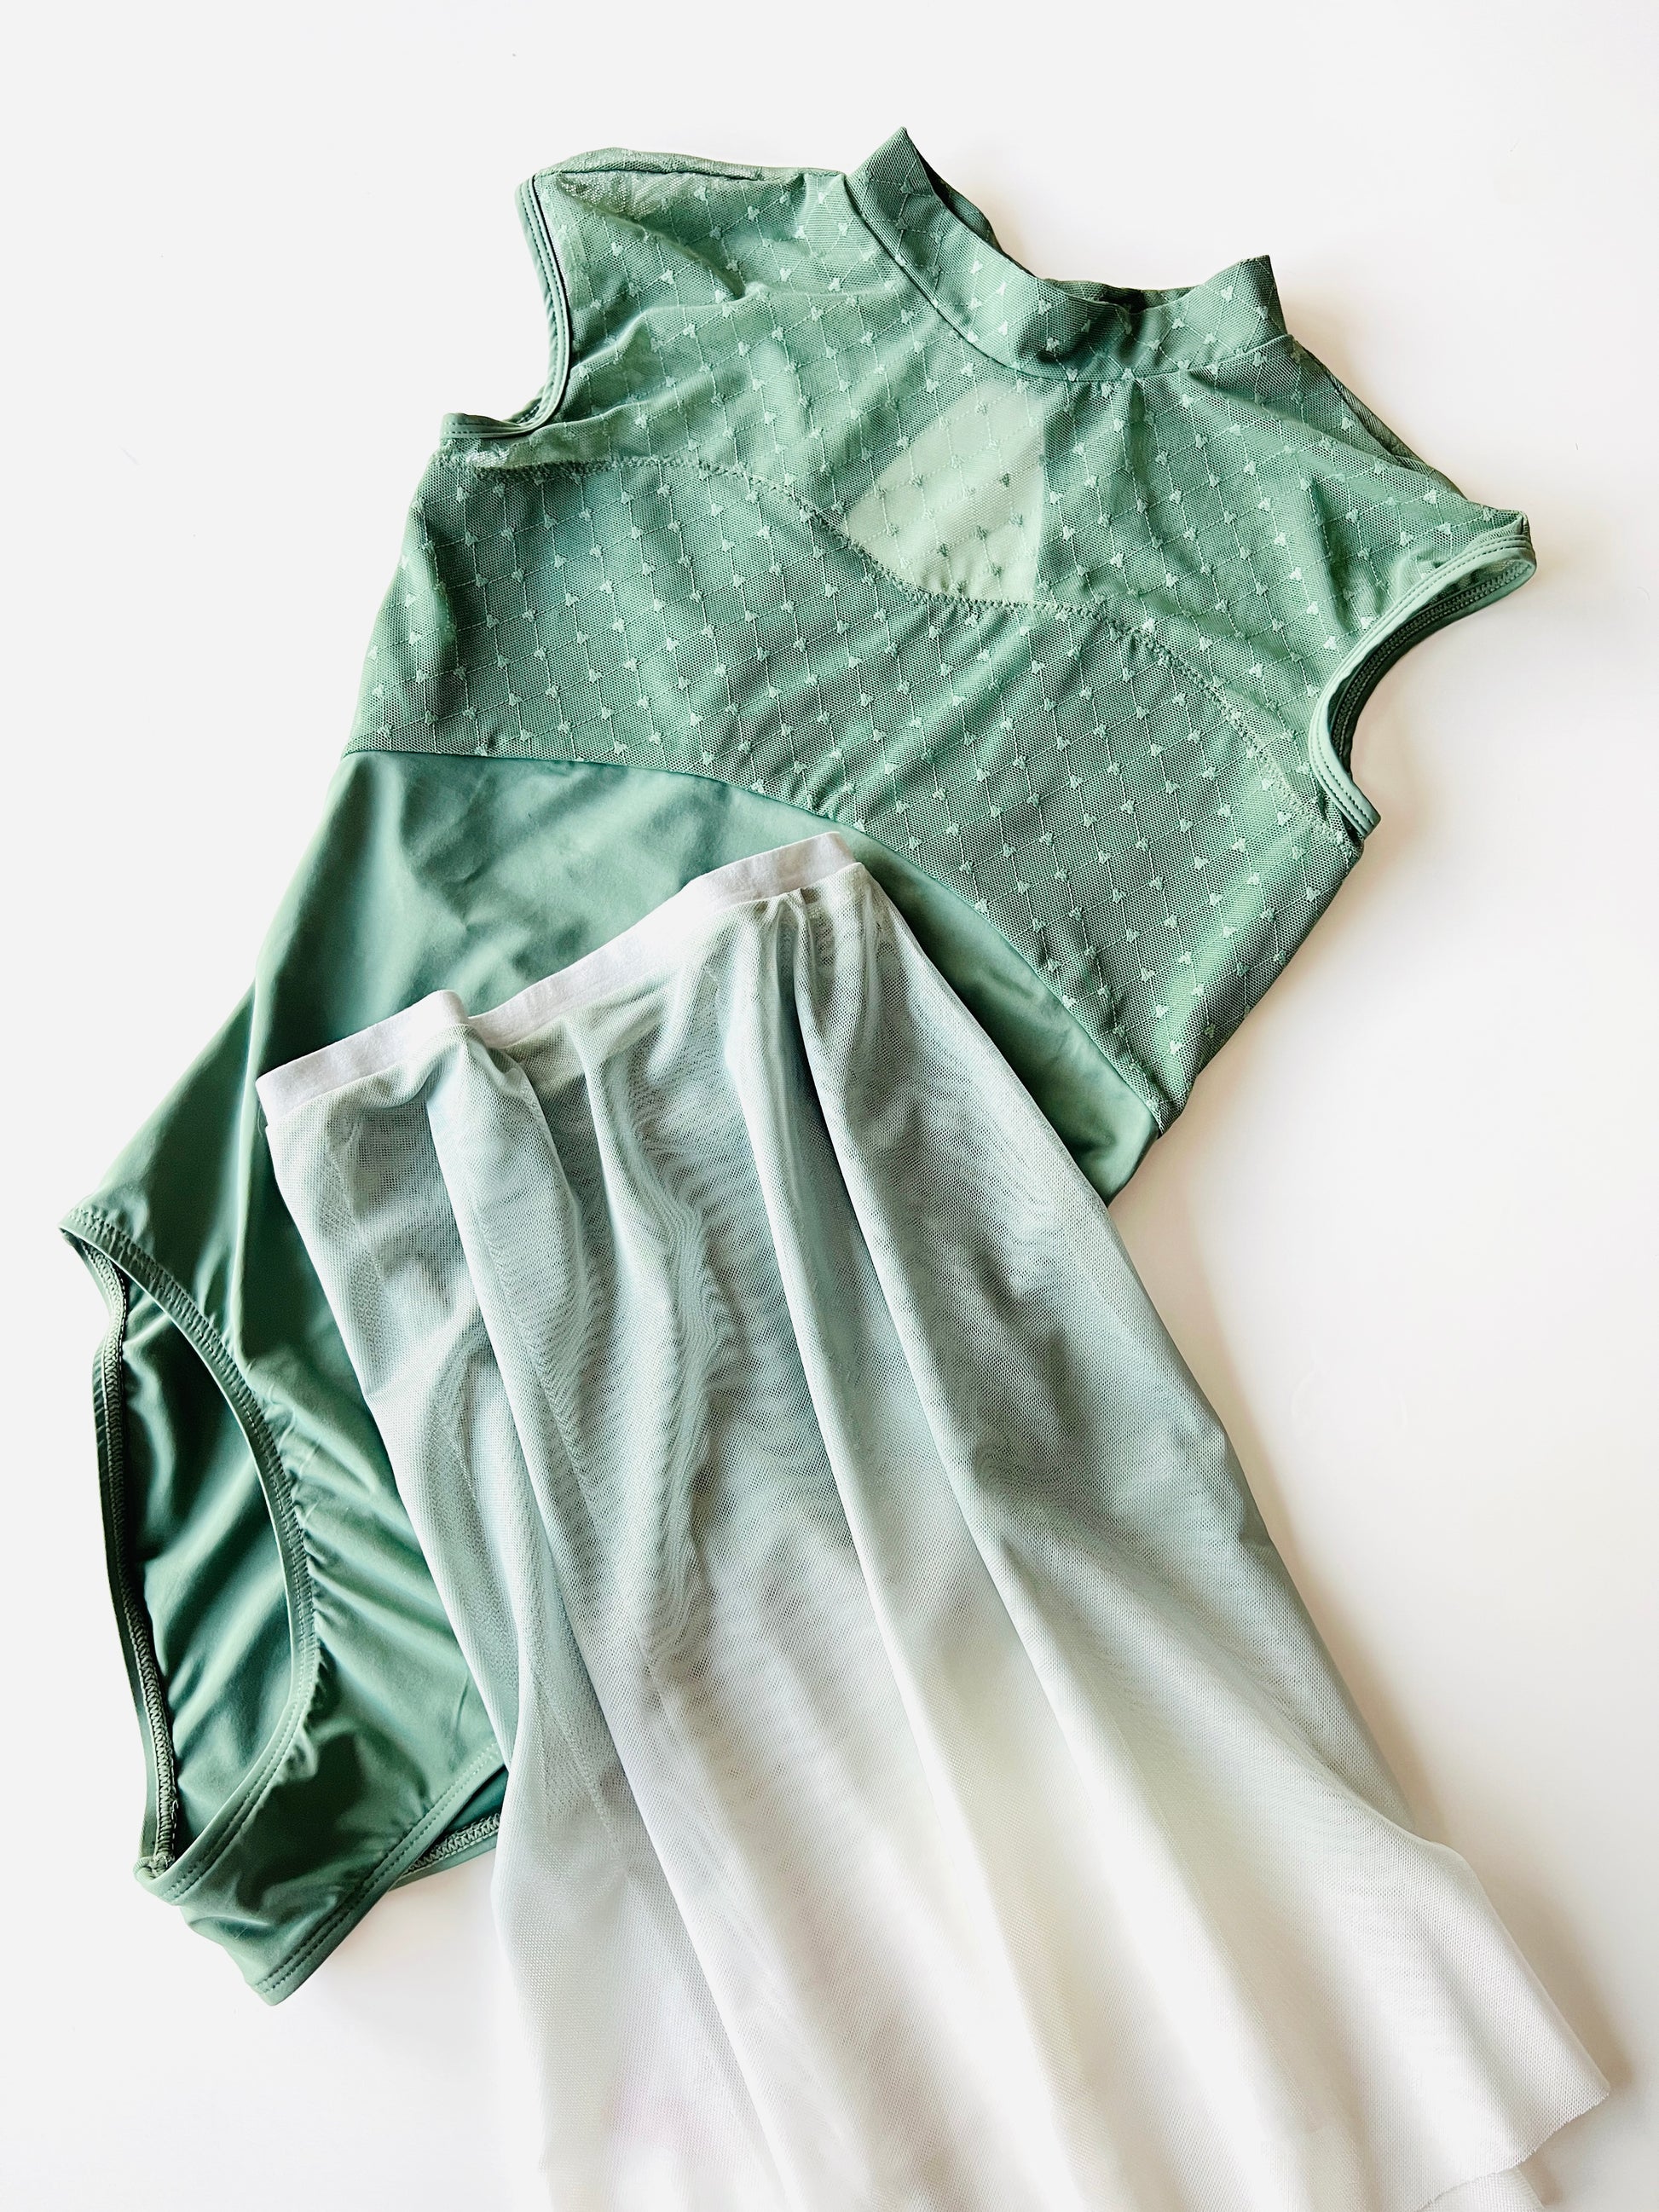 High neck patterned mesh leotard in moss green from The Collective Dancewear